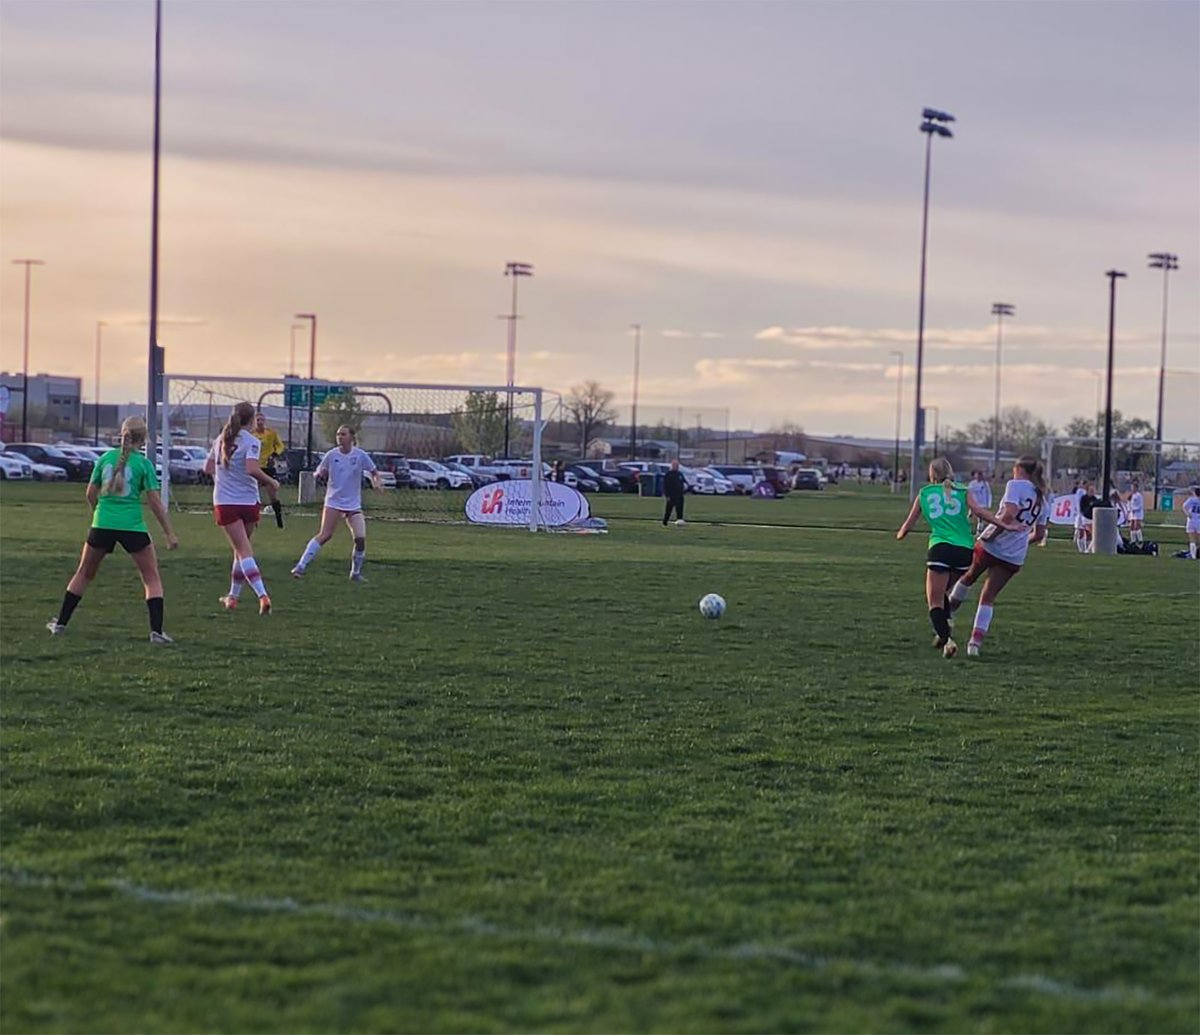 COMPETE 🇺🇸🇬🇧🇹🇿 It's great to see our 06 Girls working hard at the State Cup 👊 They put in a mighty shift in their opening game. Well done! 👏 JOIN US TRYOUTS 👇 📲 DM 📥 info.usa@7eliteacademy.com 🌐 7tryouts.com #7EliteAcademy | #PlayerPathway | #CollegeSoccer